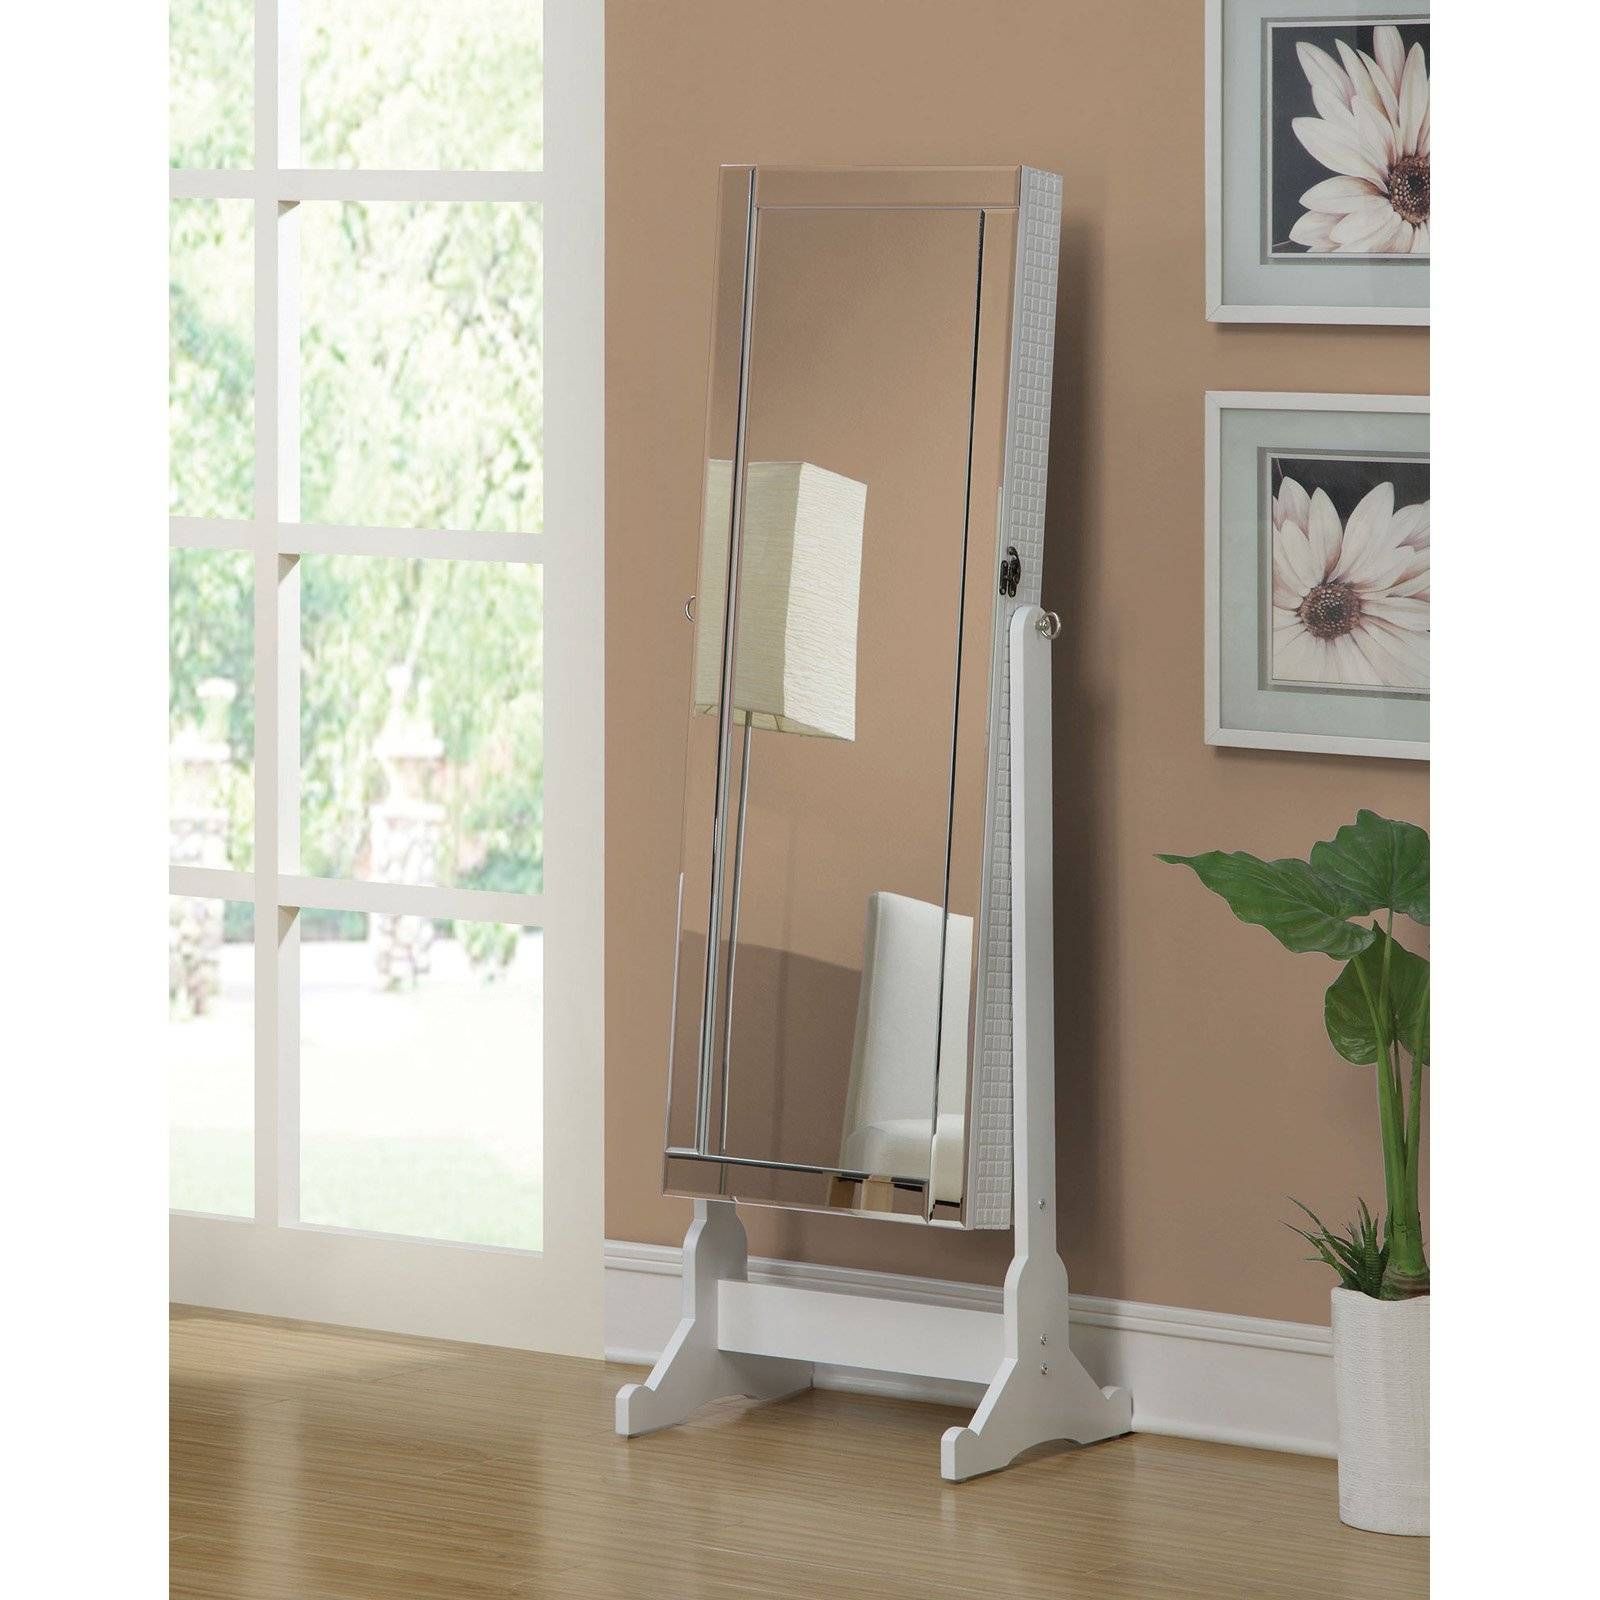 Transitional Cherry Jewelry Armoire Cheval Mirror | Hayneedle Within Cheval Mirrors (View 25 of 25)